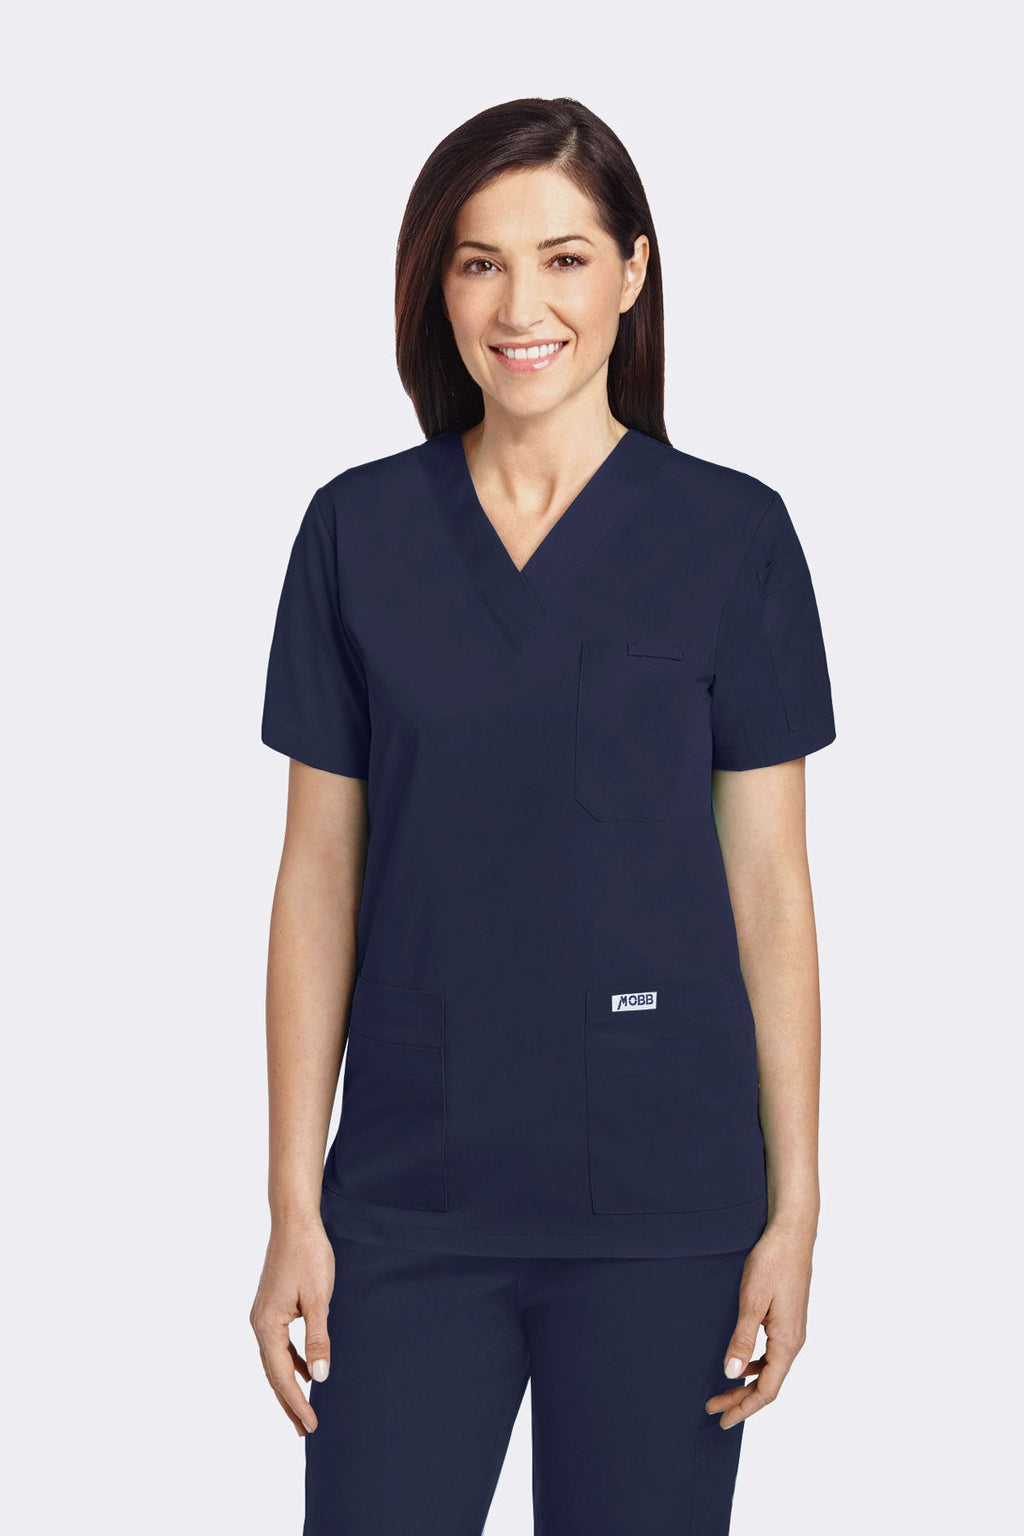 Product - MOBB Clearance V-Neck Solid Scrub Top